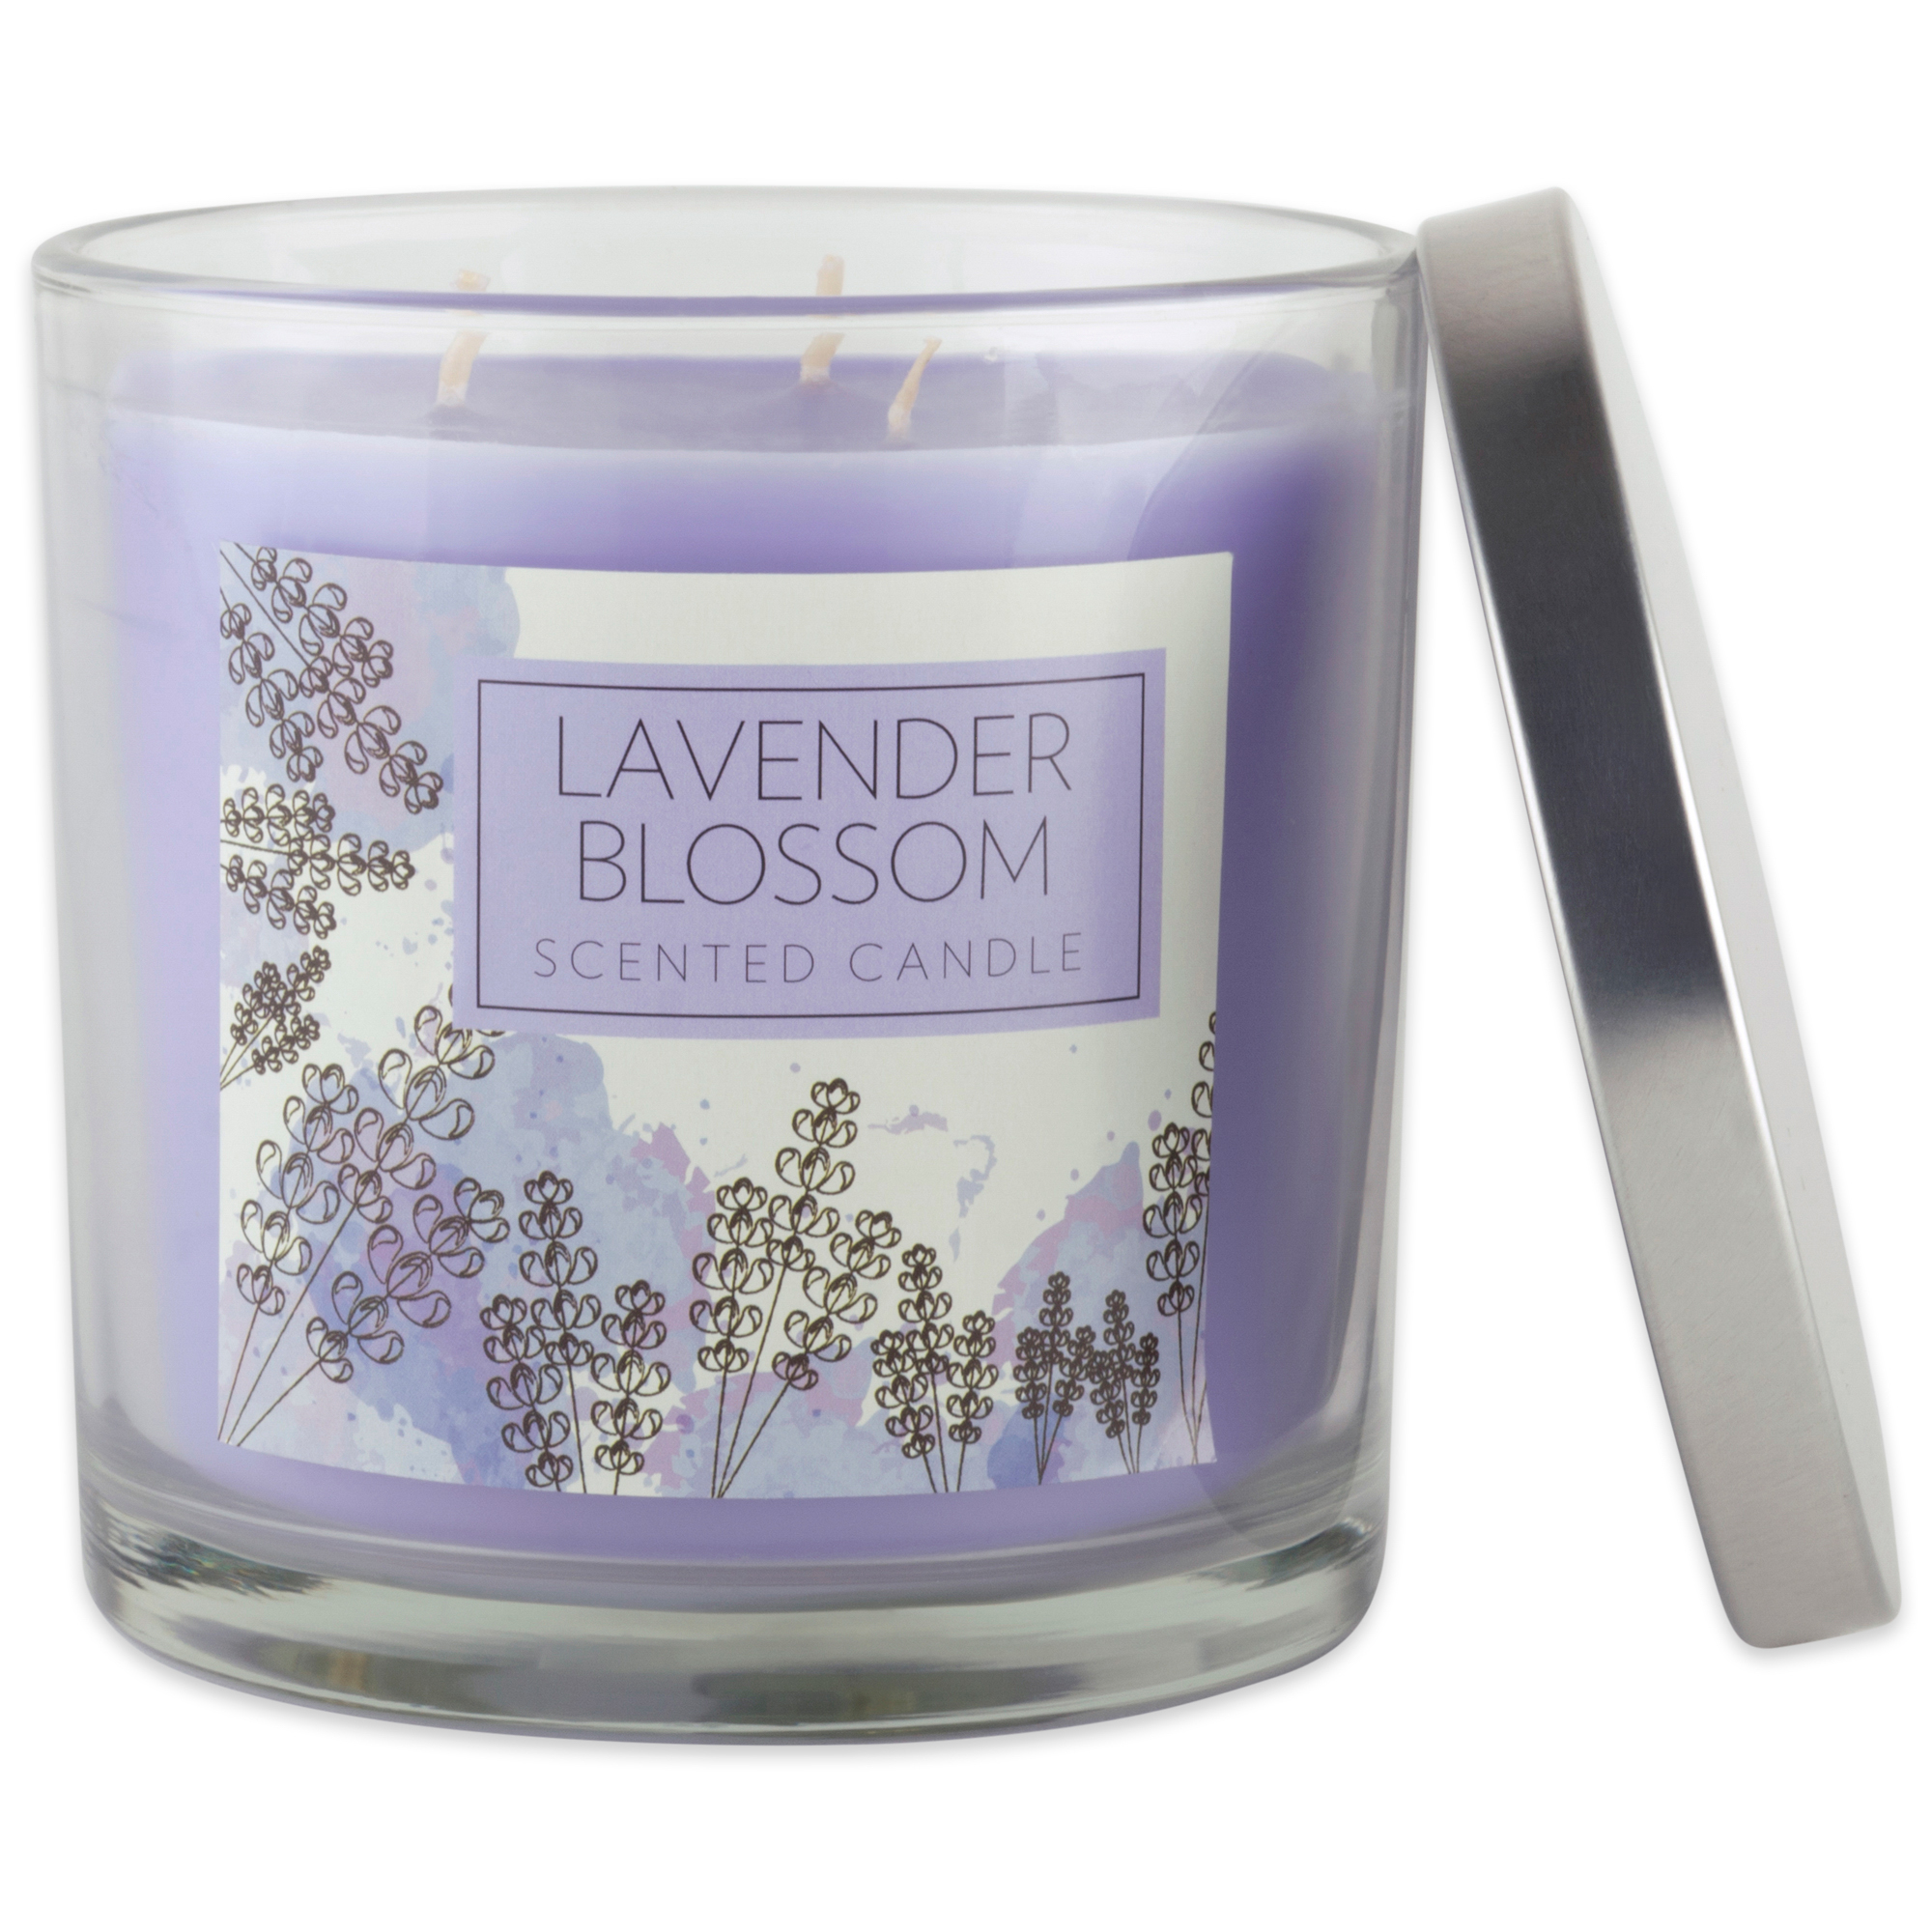 DII Lavender Blossom 3 Wick Scented Candle 